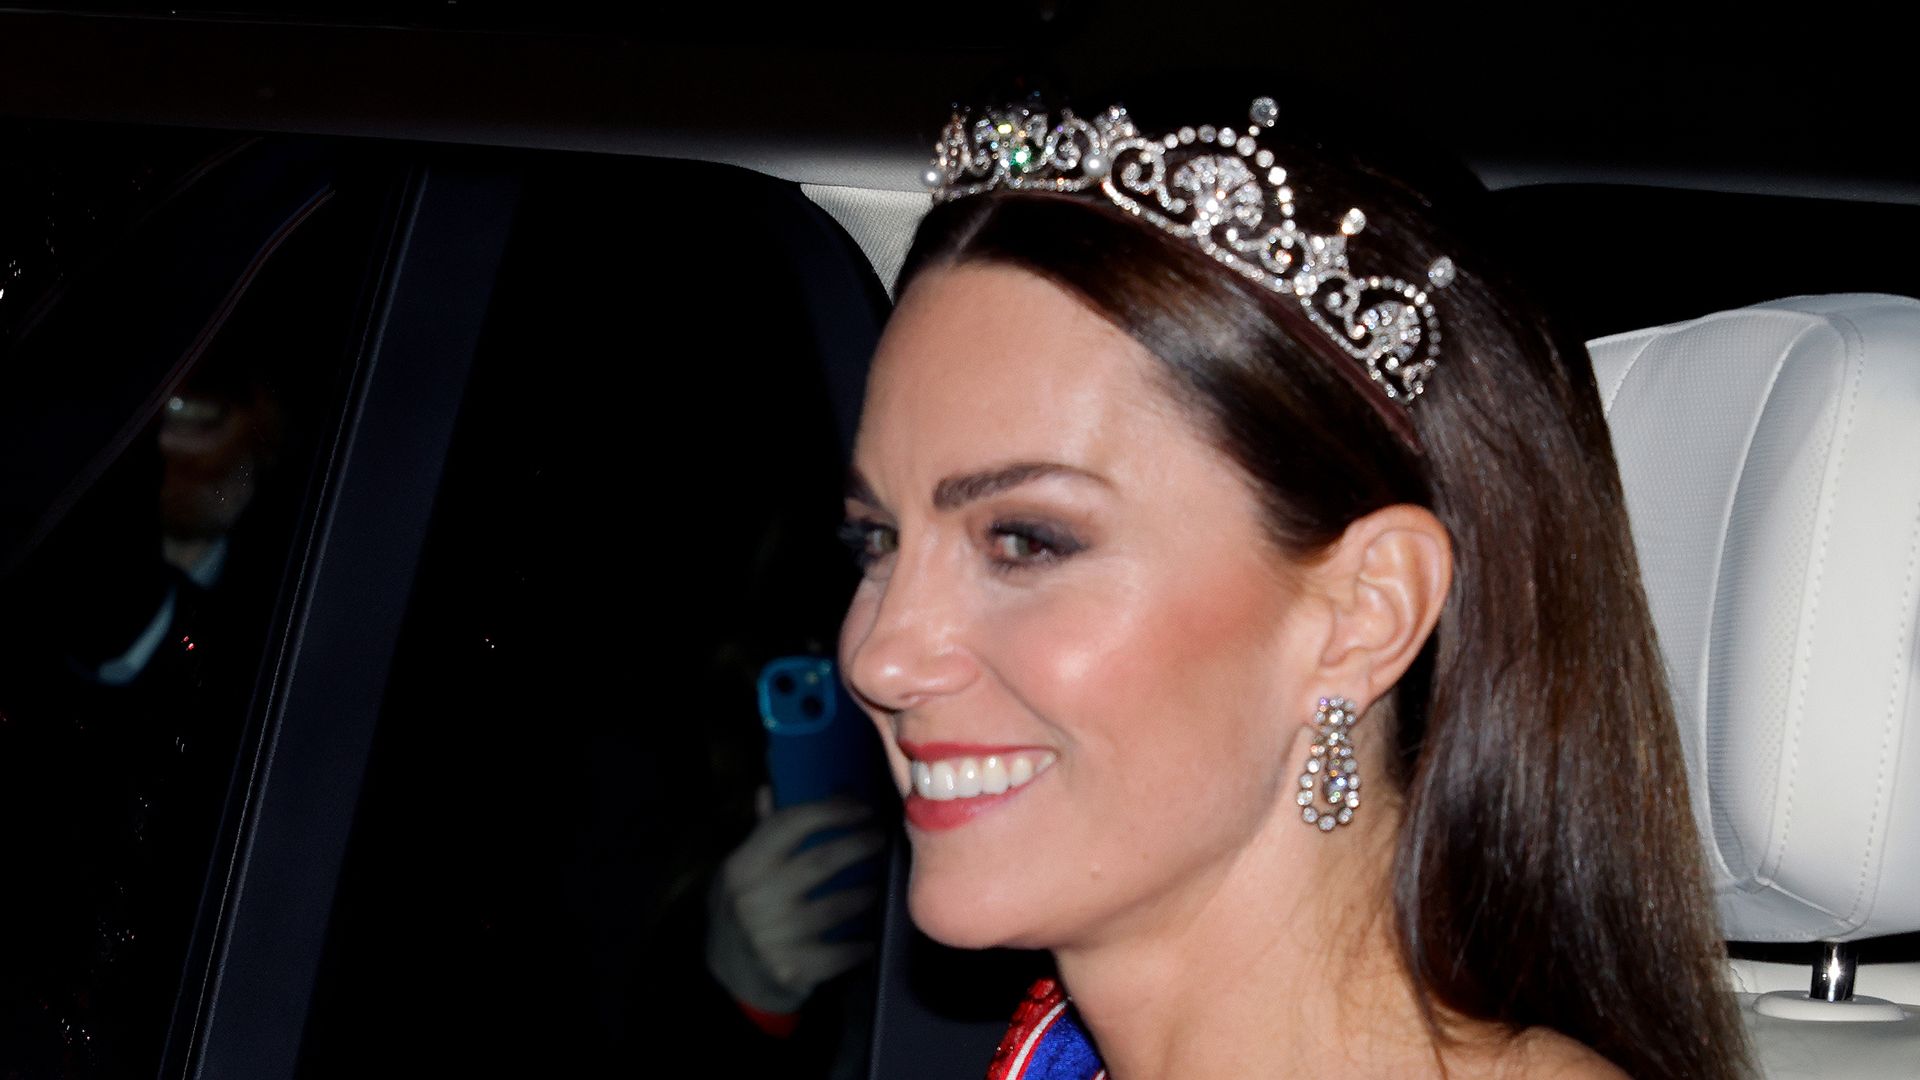 The Princess of Wales wearing the Lotus Flower tiara and her GCVO sash for the Diplomatic reception